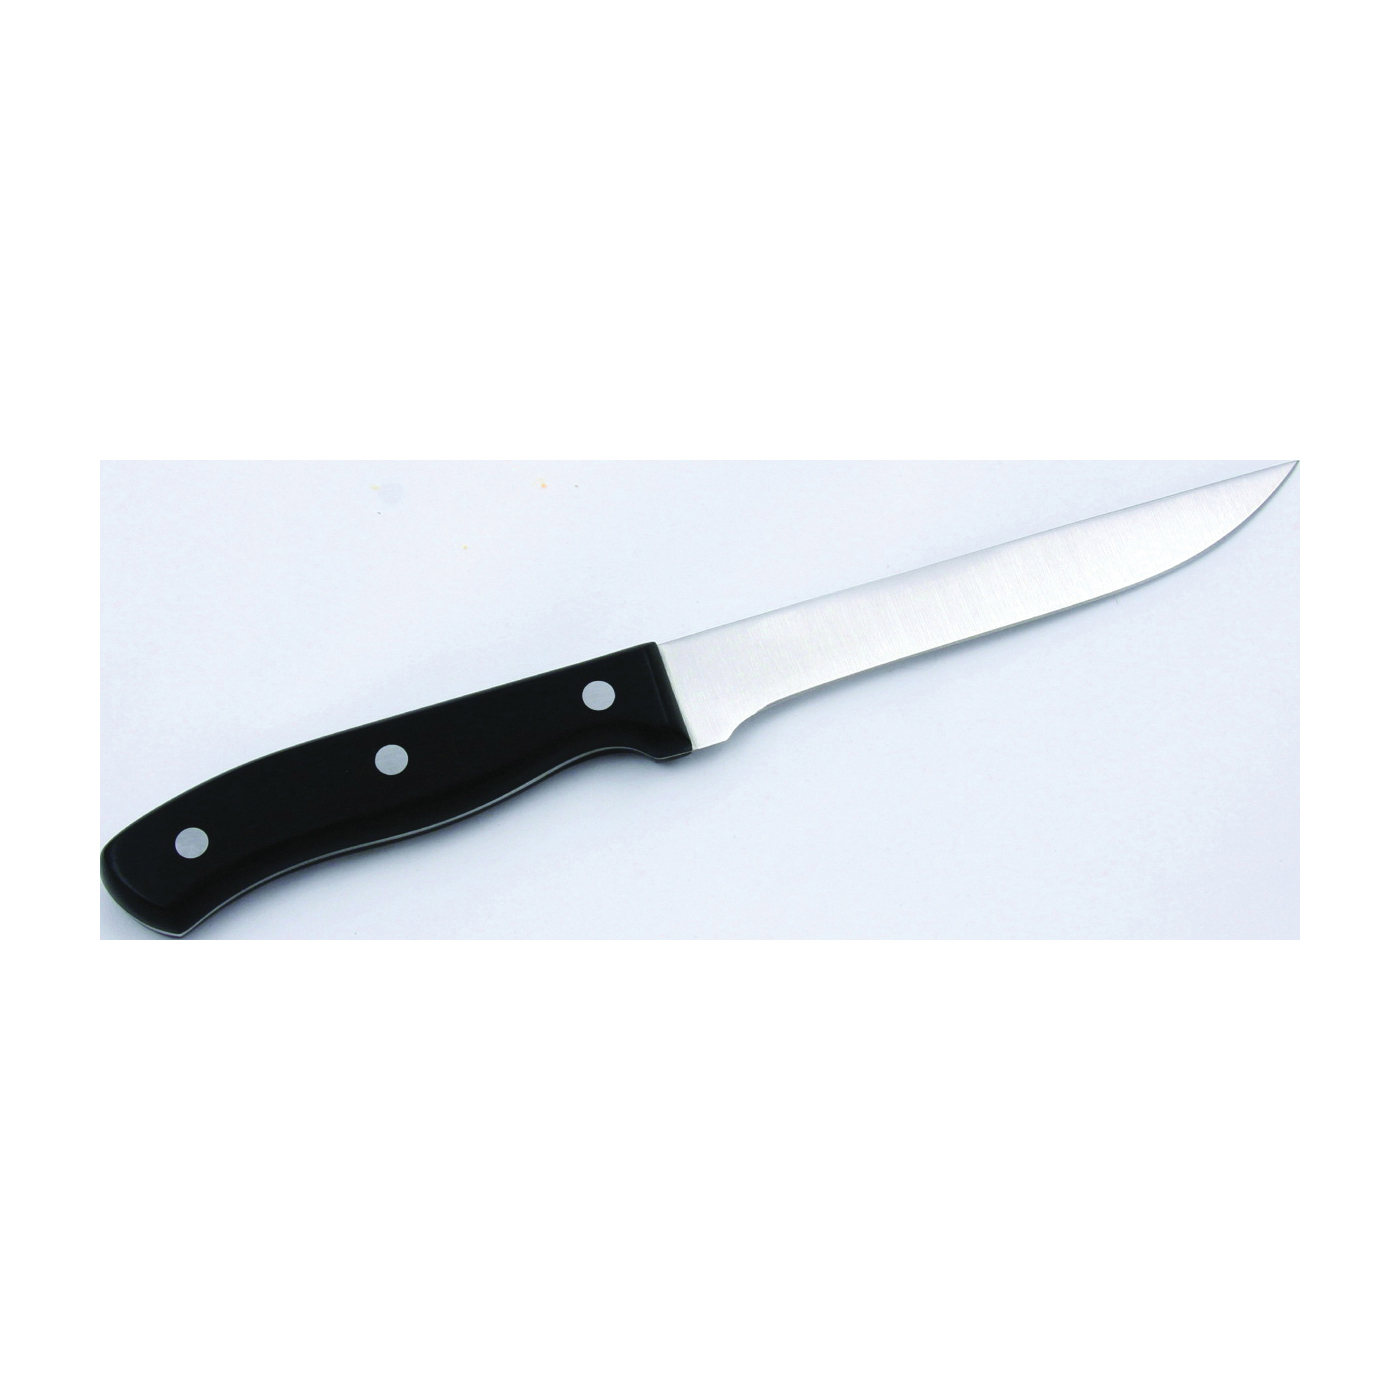 Chef Craft 21668 Boning Knife, Stainless Steel Blade, POM Handle